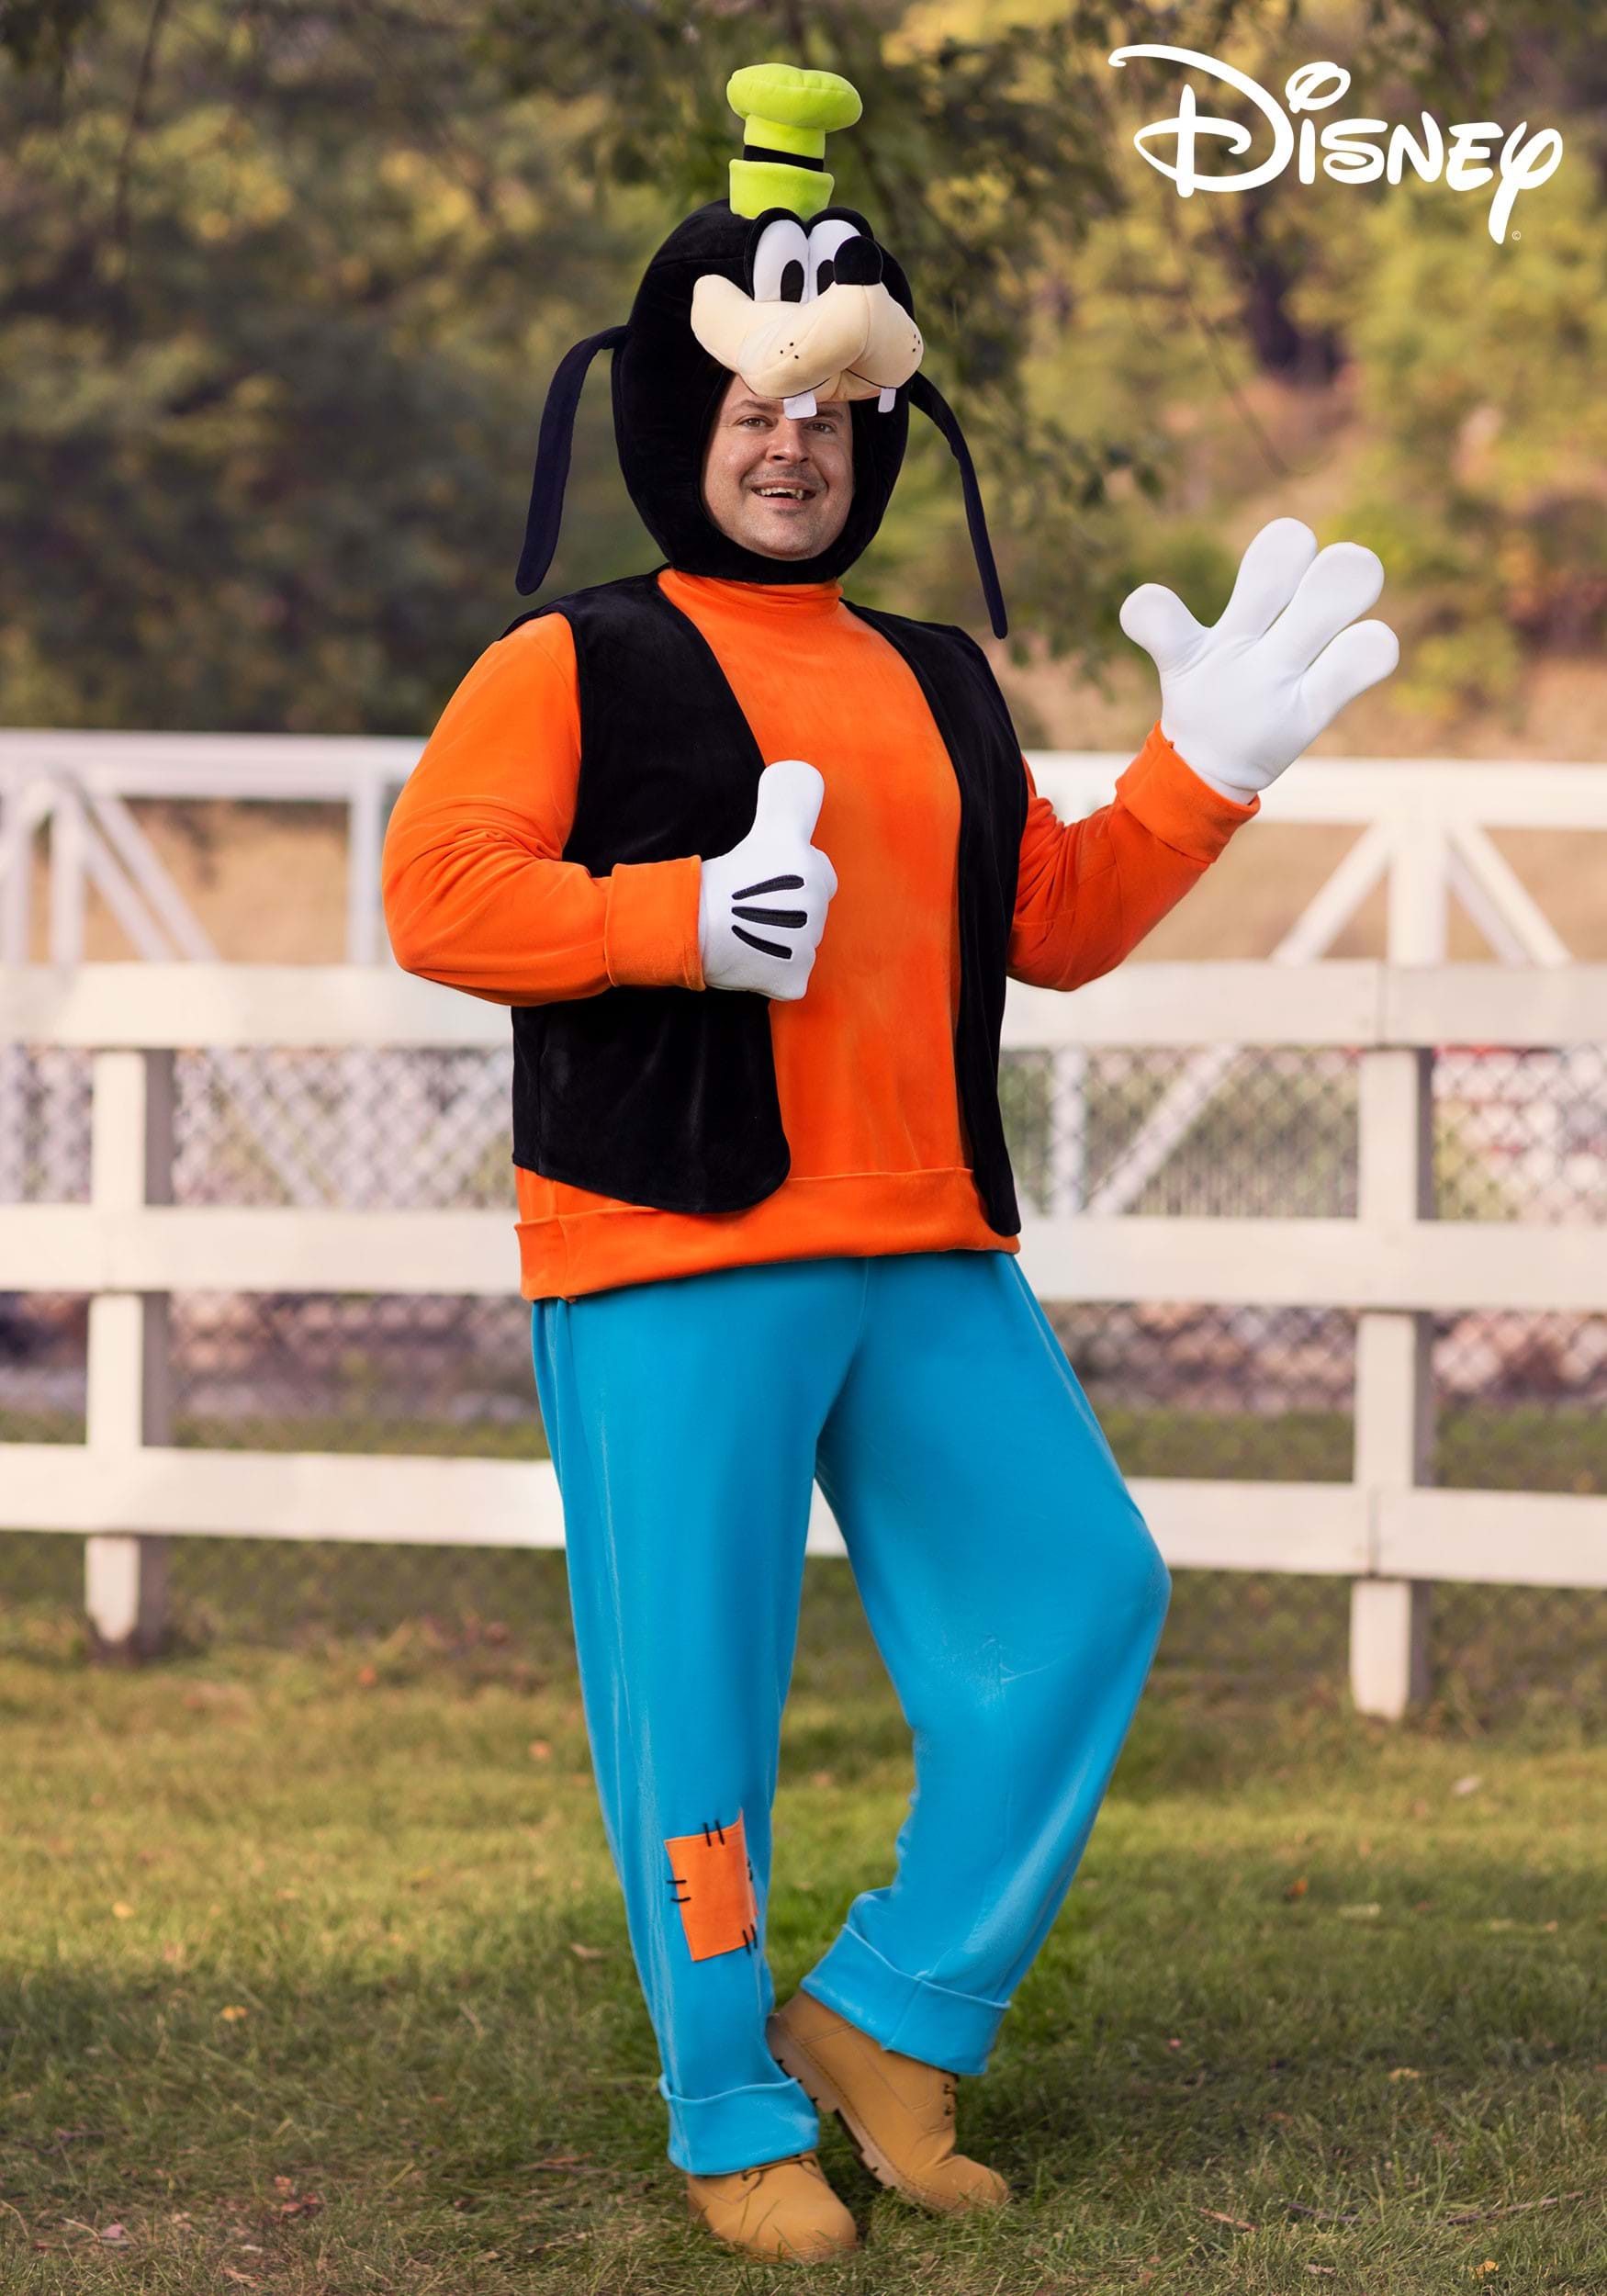 https://images.fun.com/products/75485/1-1/plus-size-mens-deluxe-goofy-costume.jpg